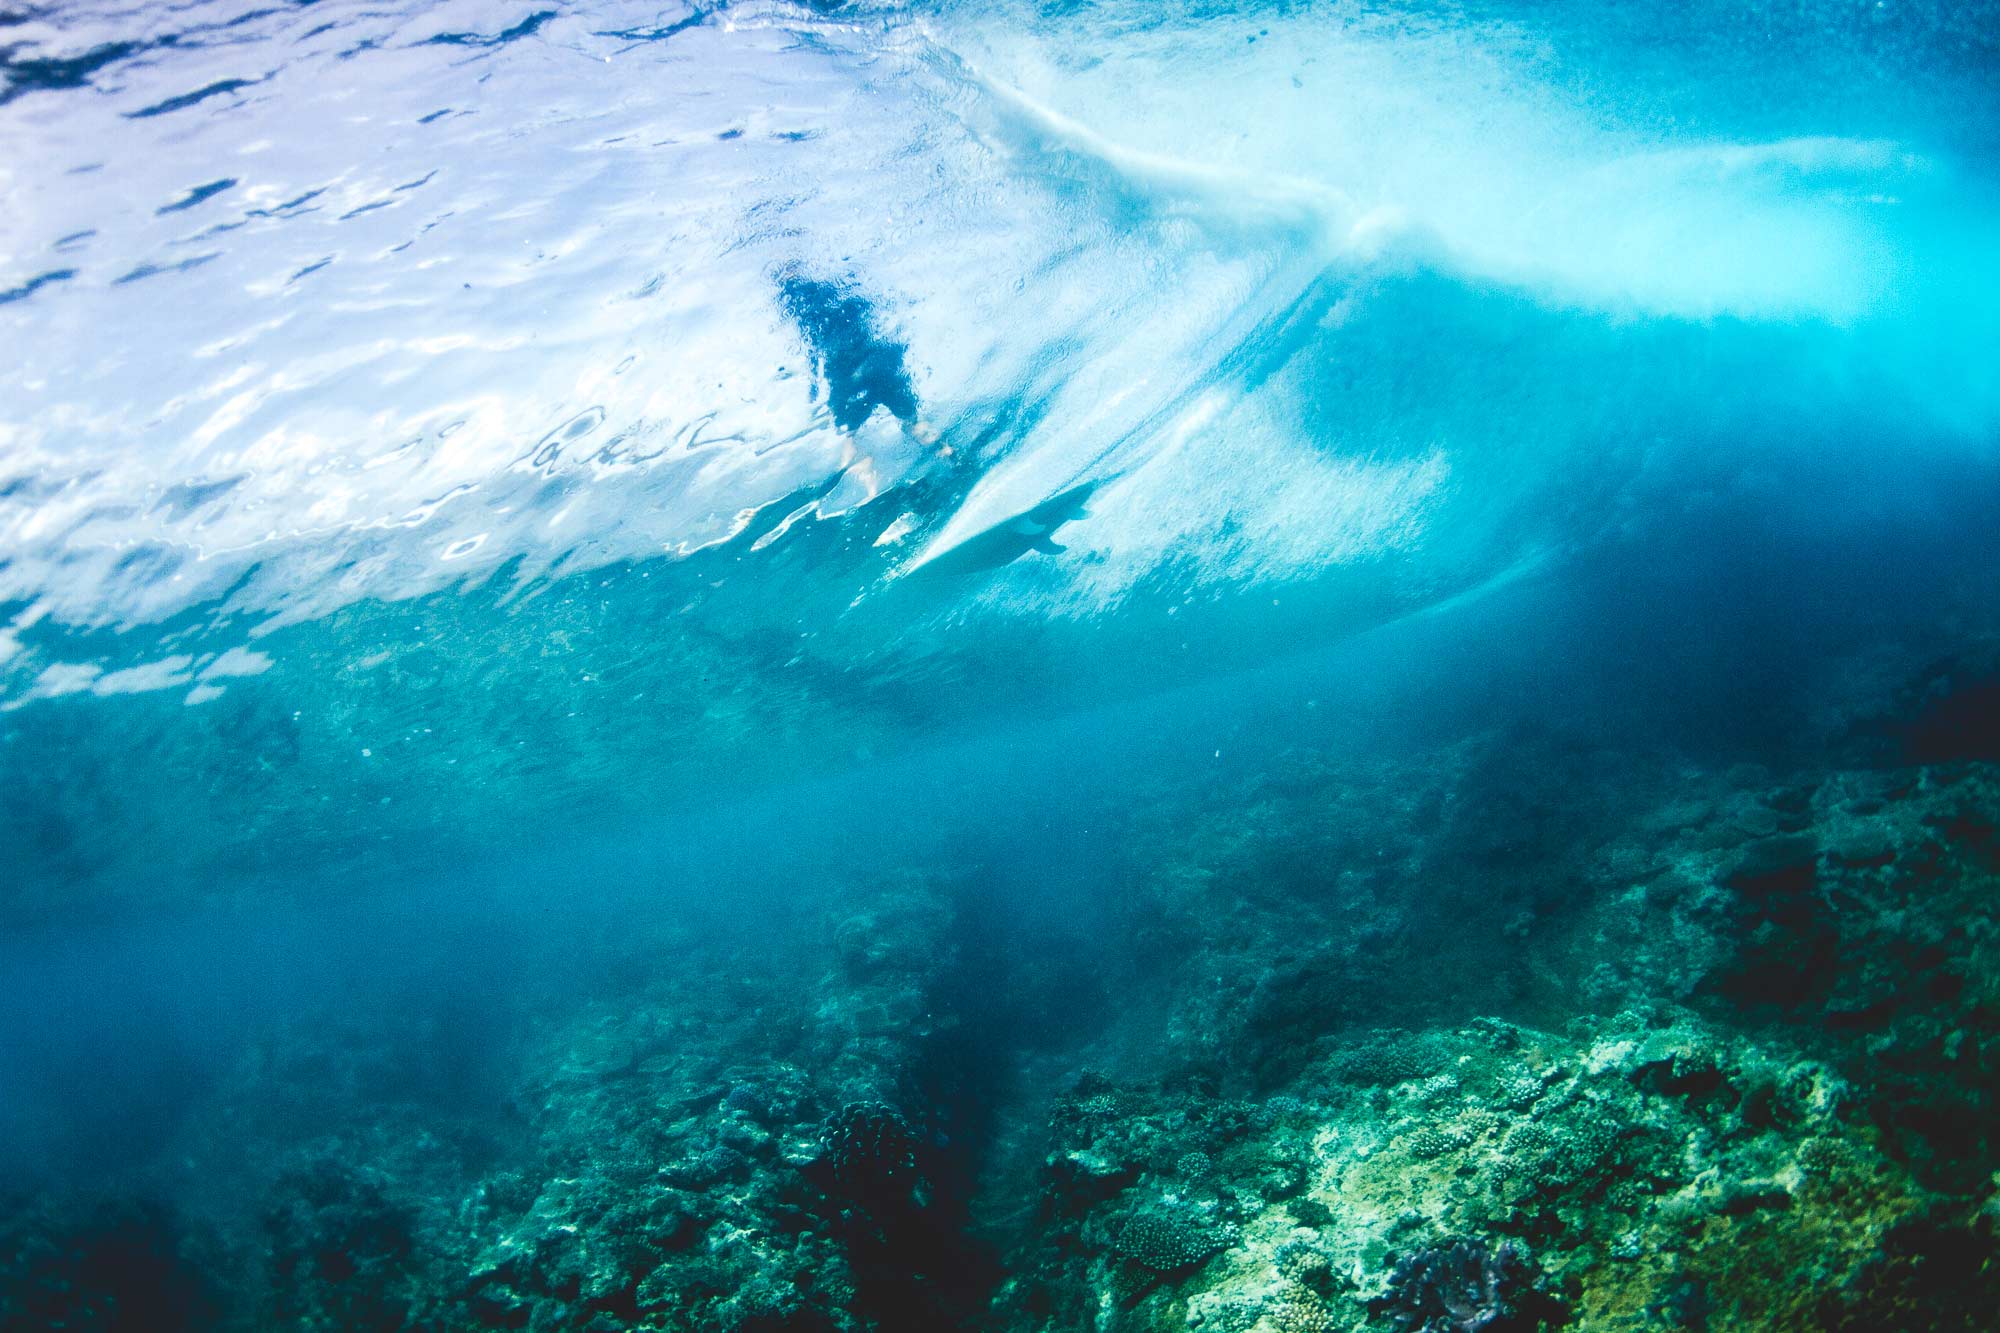 Beneath the wave with surfer at resturants surf break in Fiji